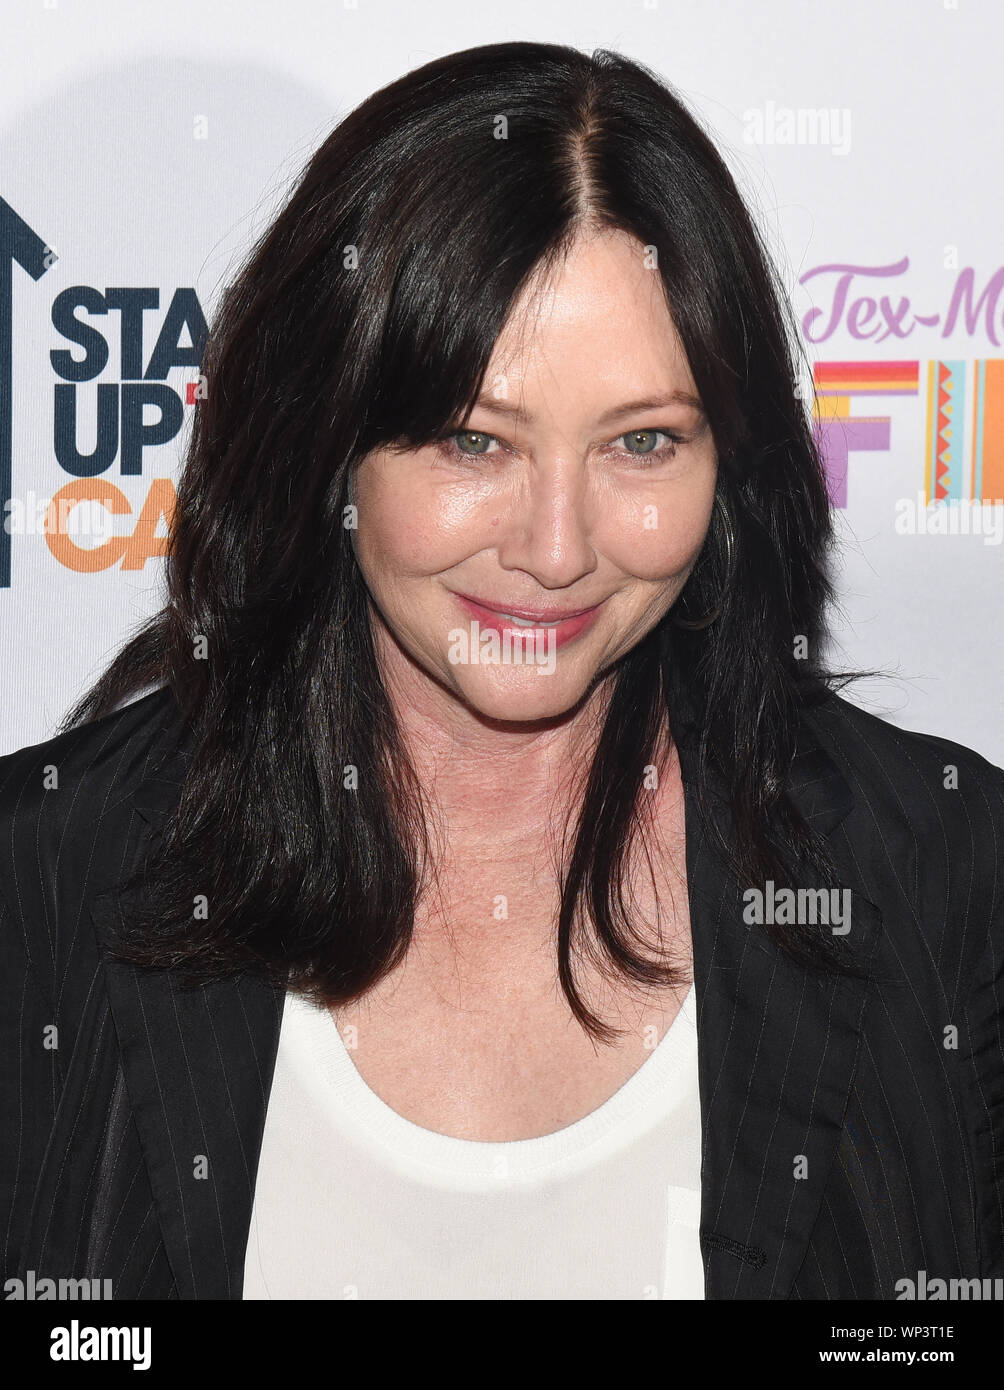 Beverly Hills, USA. 06th Sep, 2019. Shannen Doherty attends at the Farrah Fawcett Foundation's 'Tex-Mex Fiesta' honoring Marcia Cross at Wallis Annenberg Center for the Performing Arts in Beverly Hills, California, on September 6, 2019. Credit: The Photo Access/Alamy Live News Stock Photo